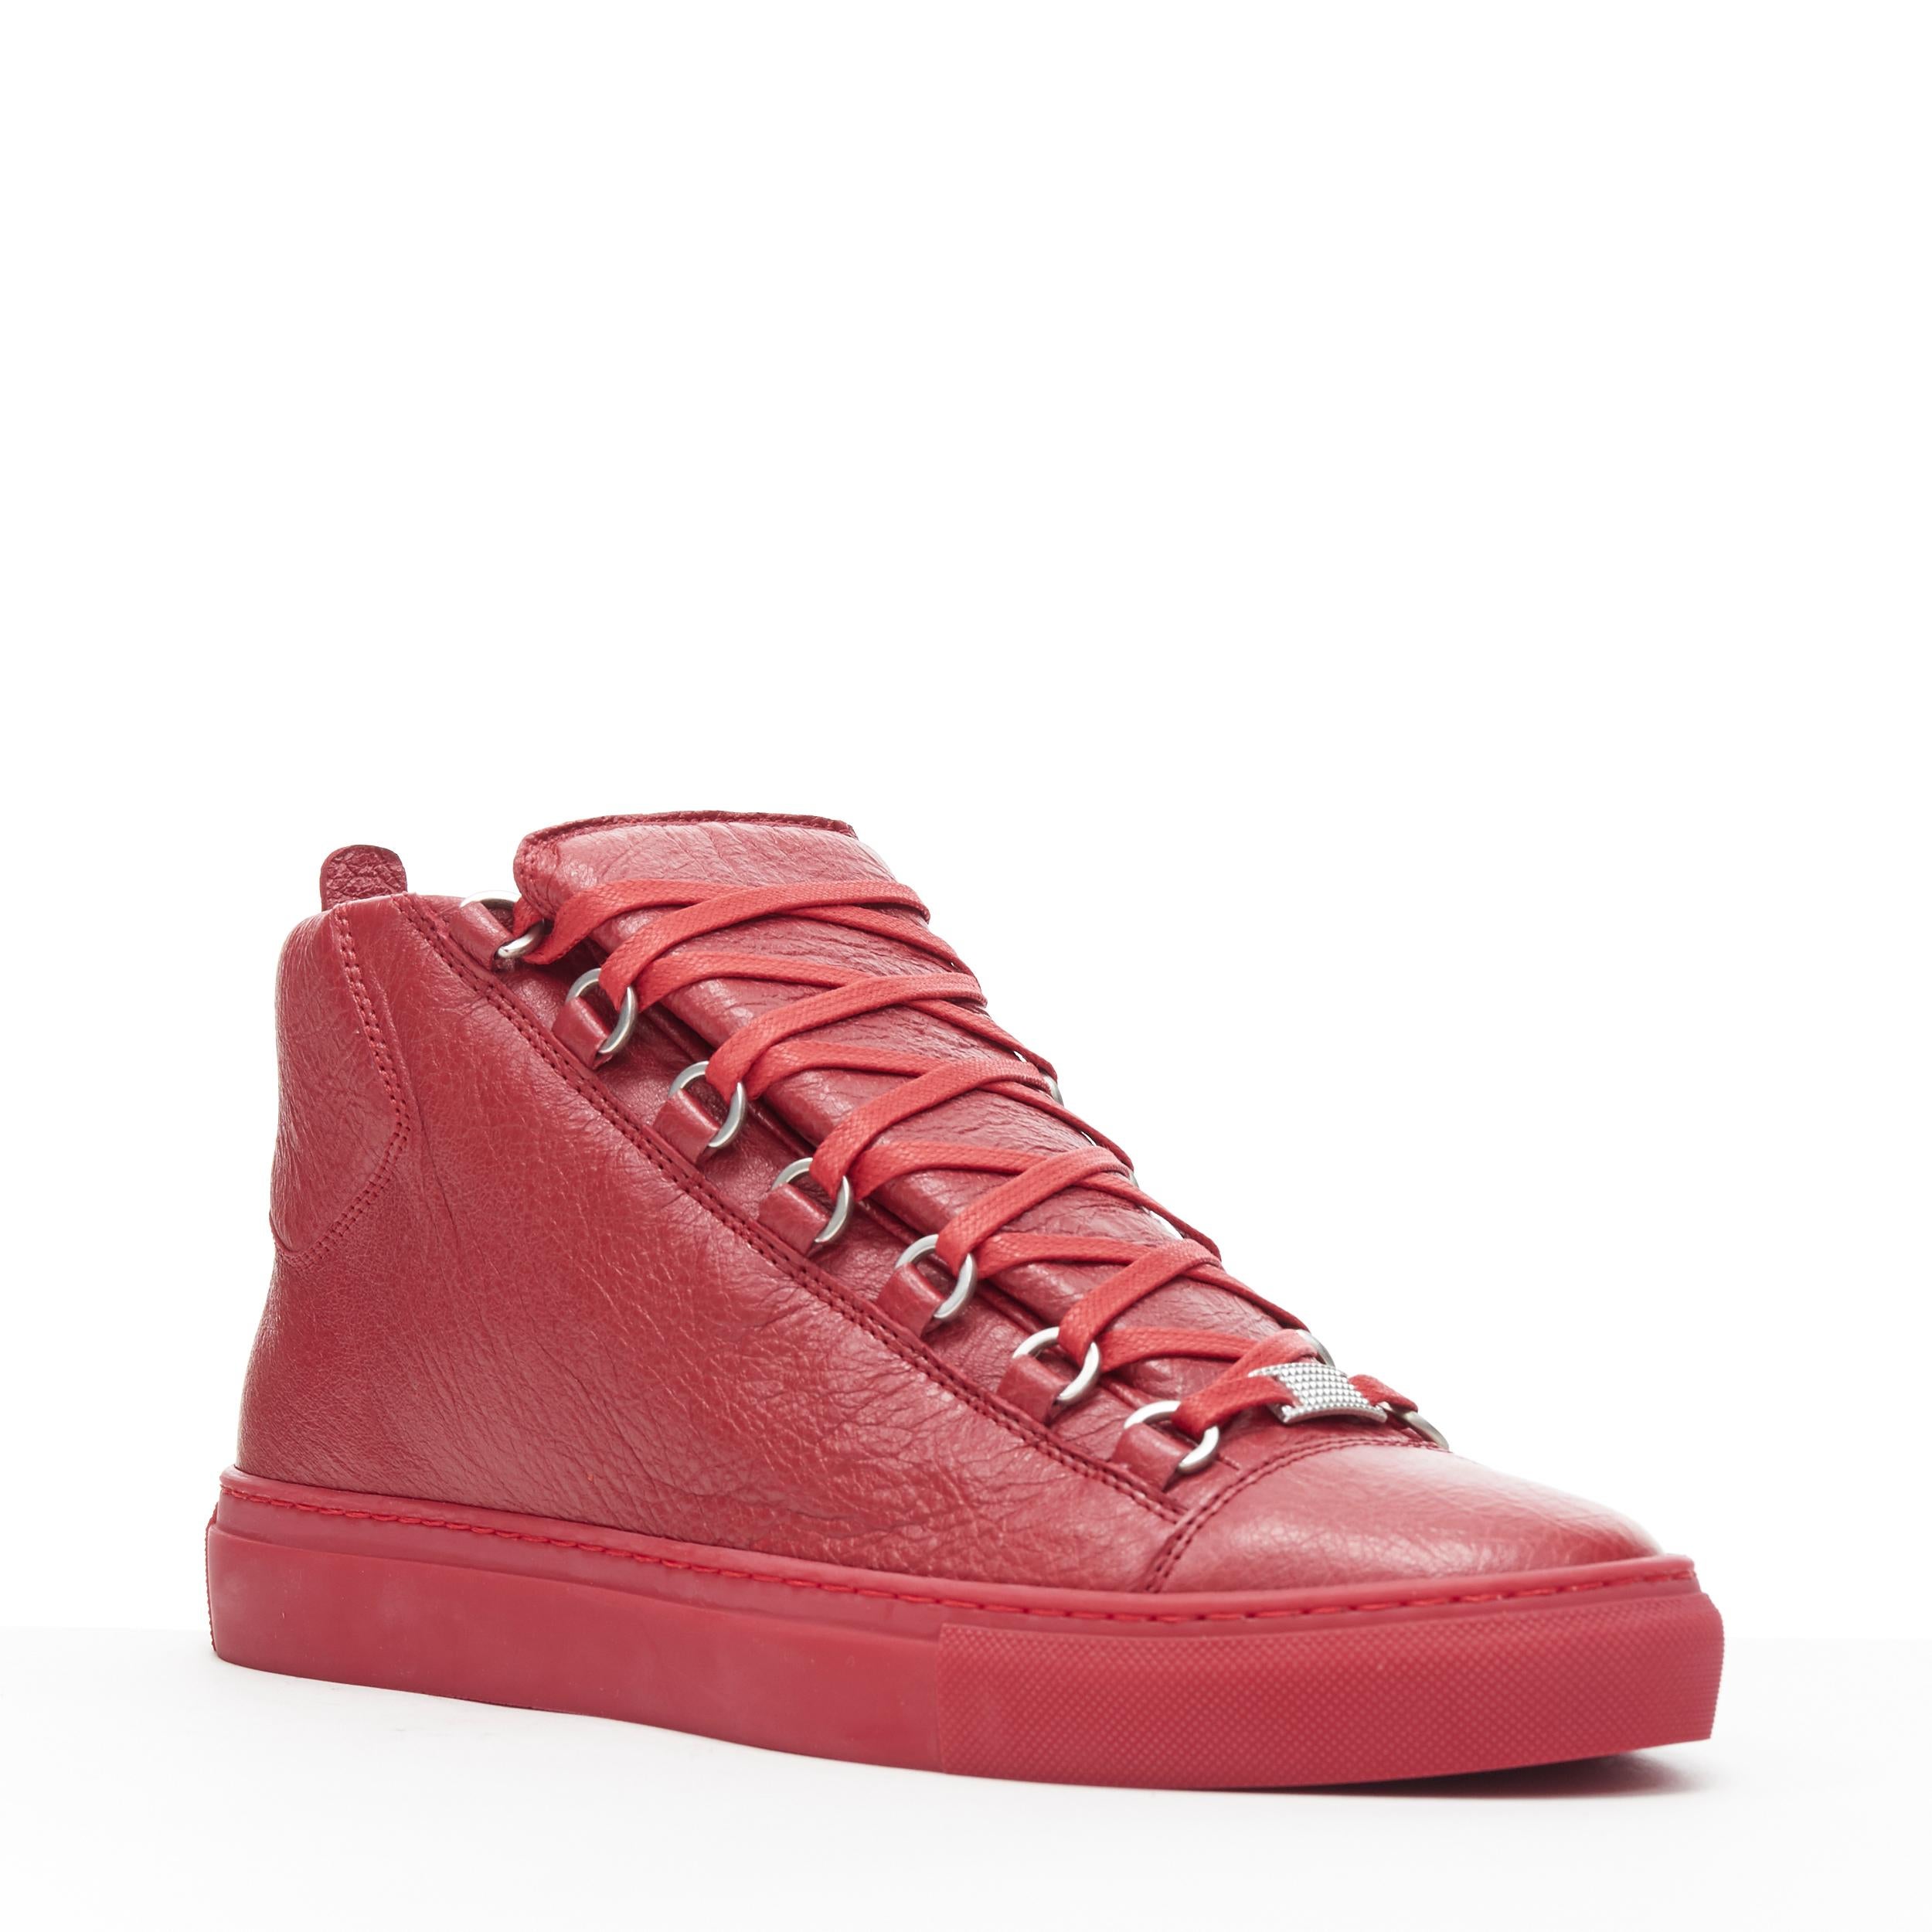 new BALENCIAGA Arena All Red high top sneakers EU40 US7 483497 WAY40 6212
Brand: Balenciaga
Model Name / Style: Balenciaga Arena
Material: Leather
Color: Red
Pattern: Solid
Closure: Lace up
Extra Detail: A classic luxury sneaker style from